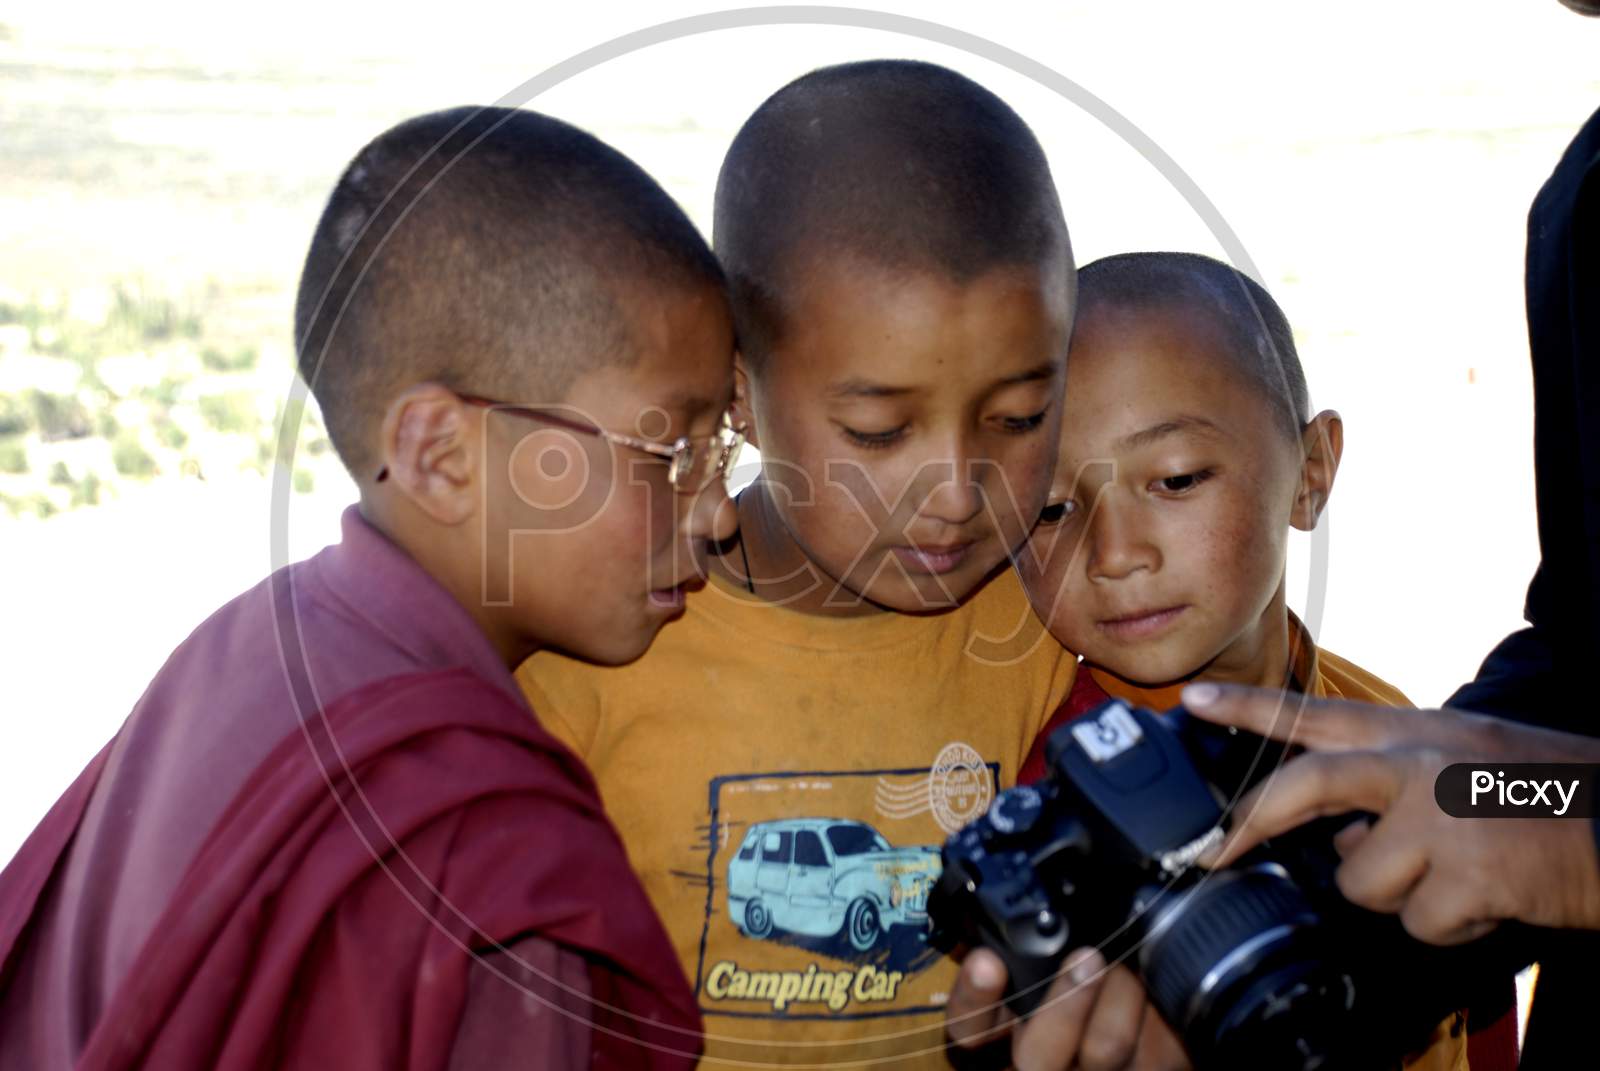 Buddhist Monk Boys Looking at a DSLR Camera